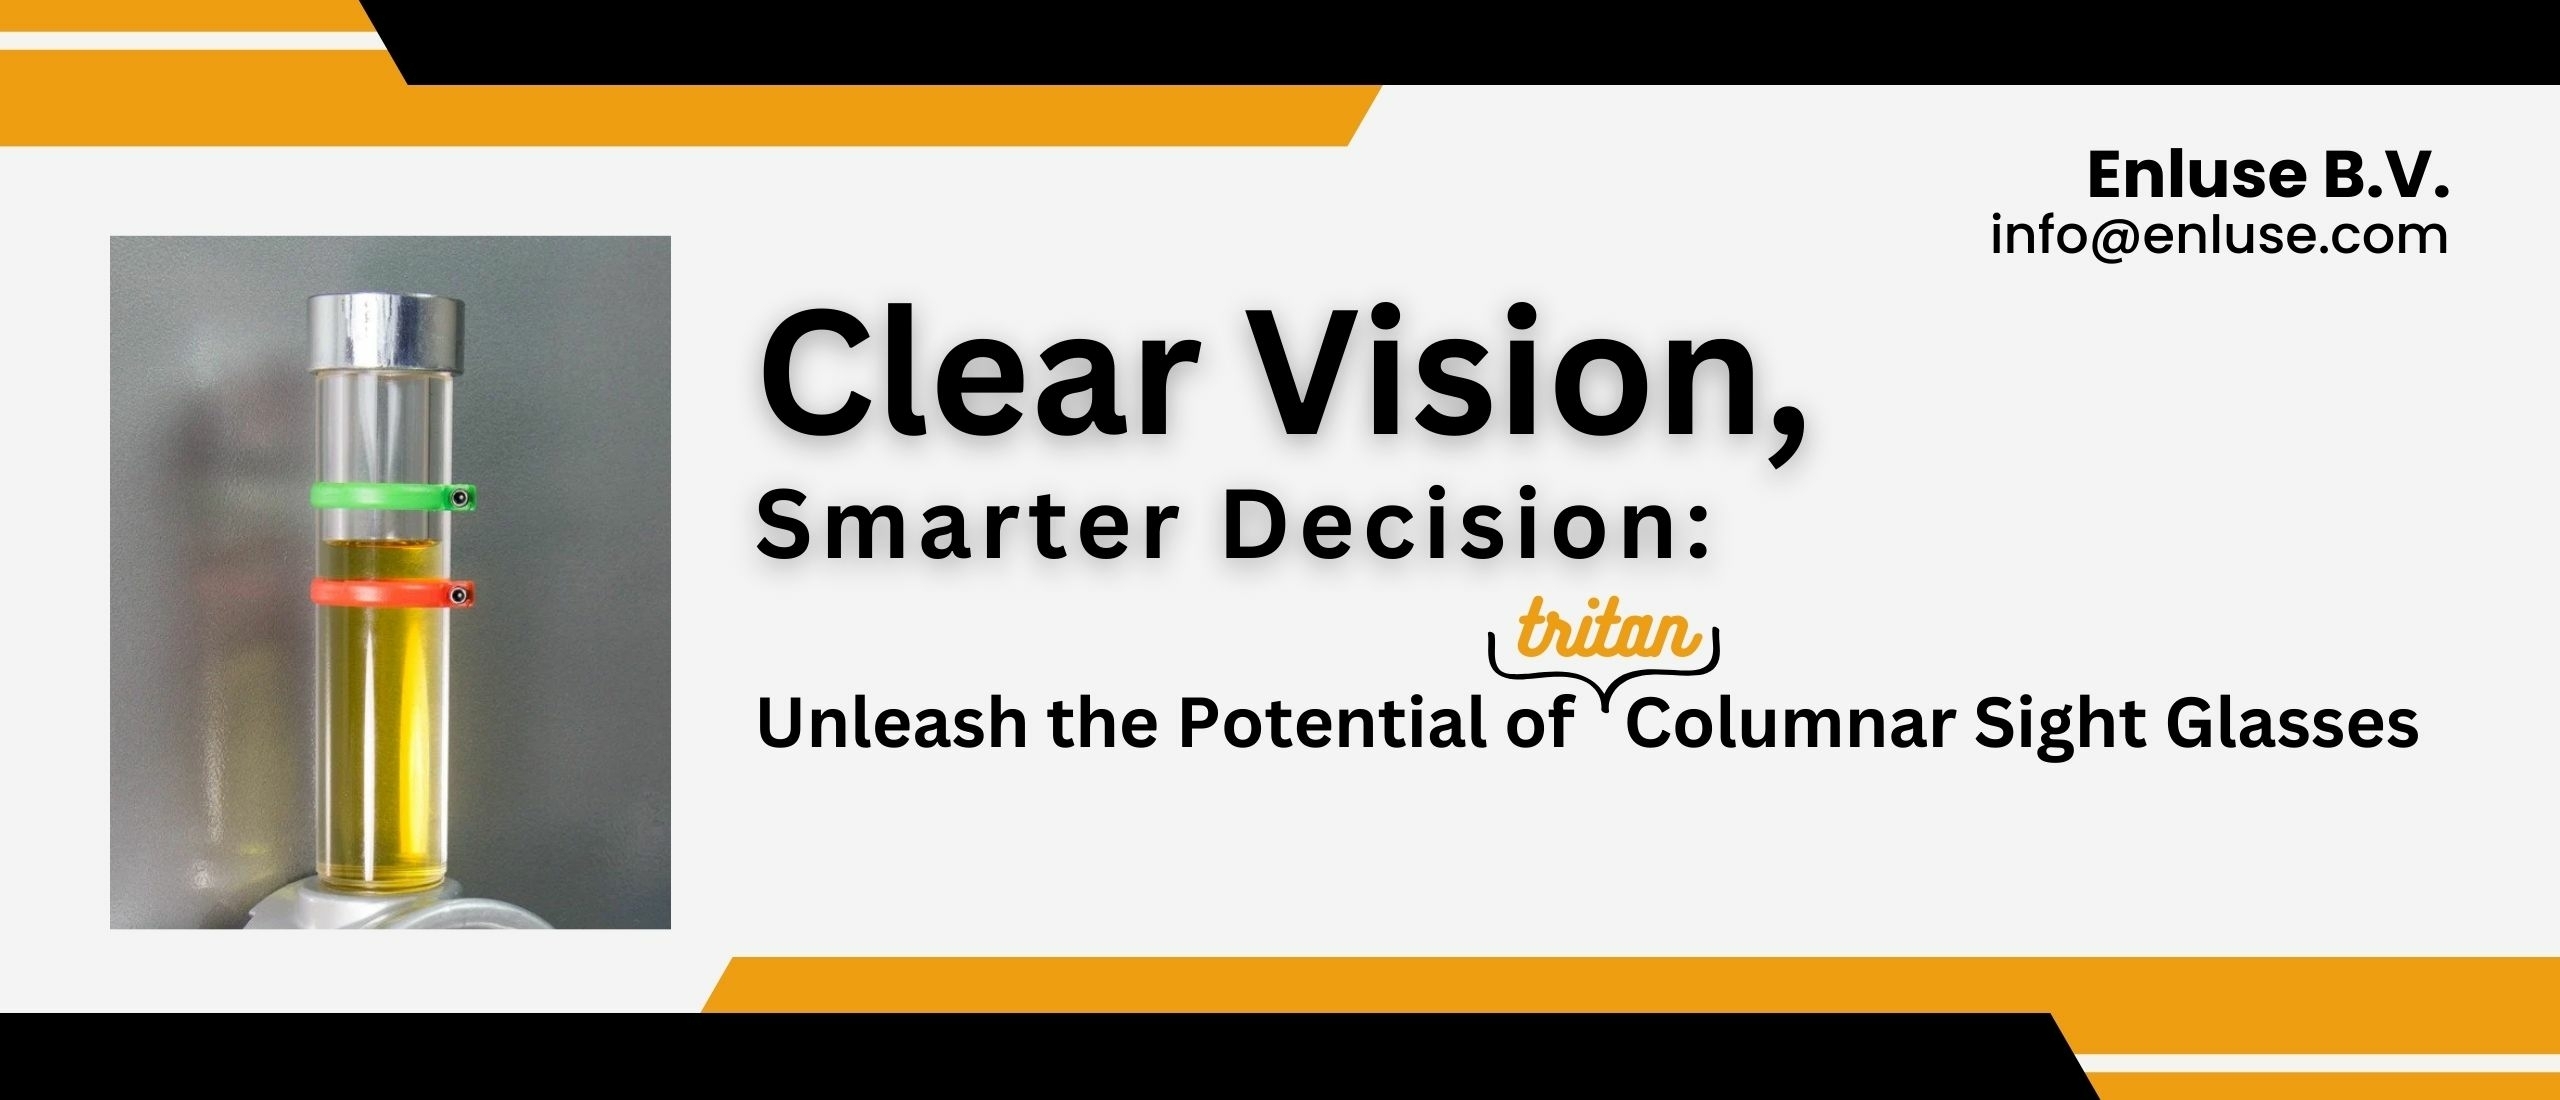 Clear vision - smarter decision